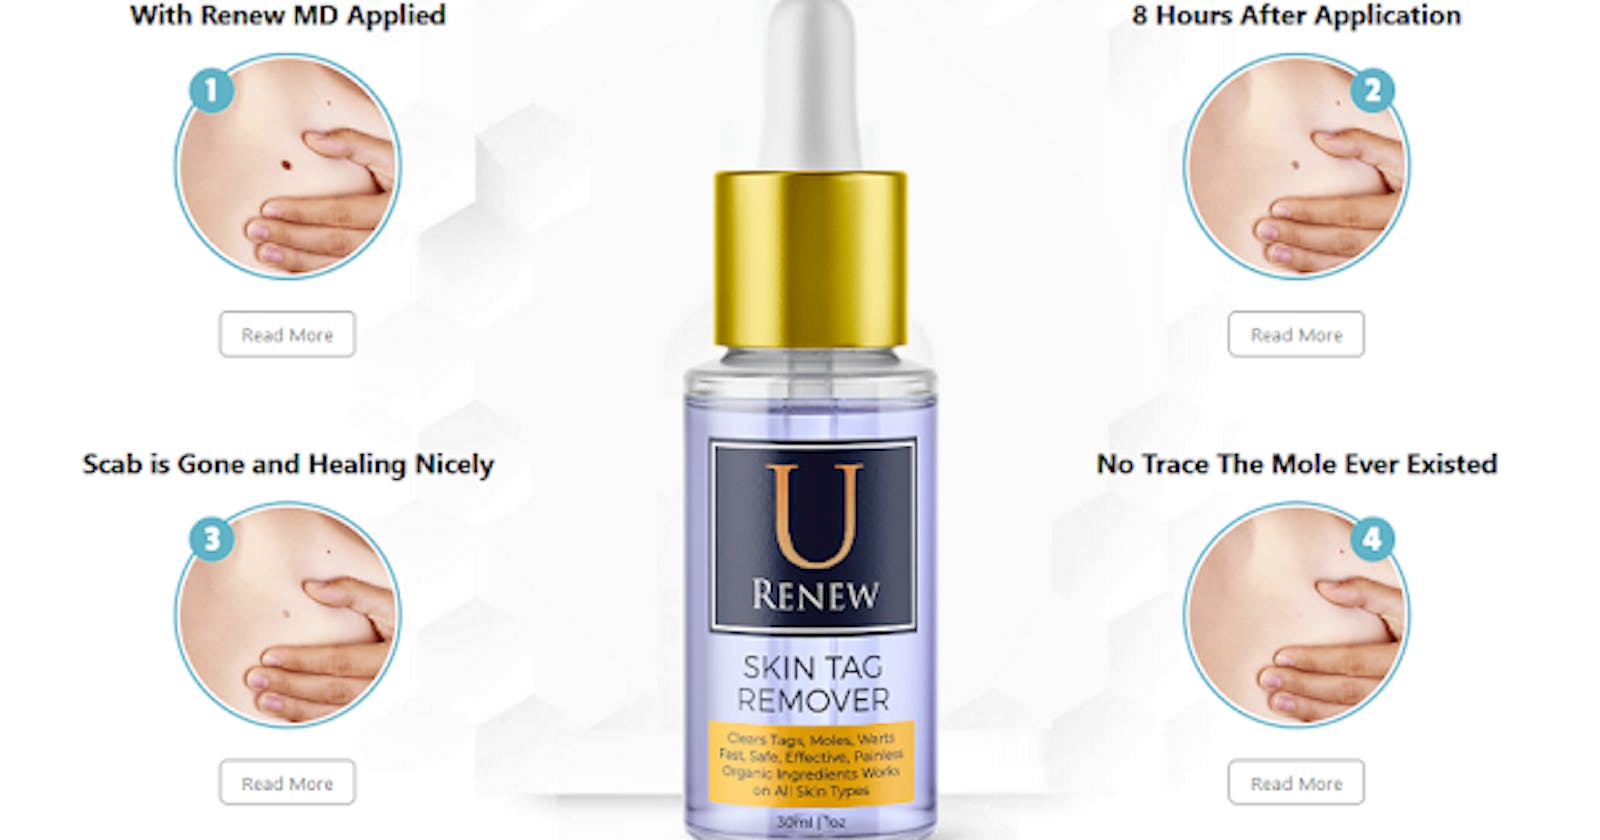 U Renew Skin Tag Remover - An Anti-Aging Formula For Wrinkle